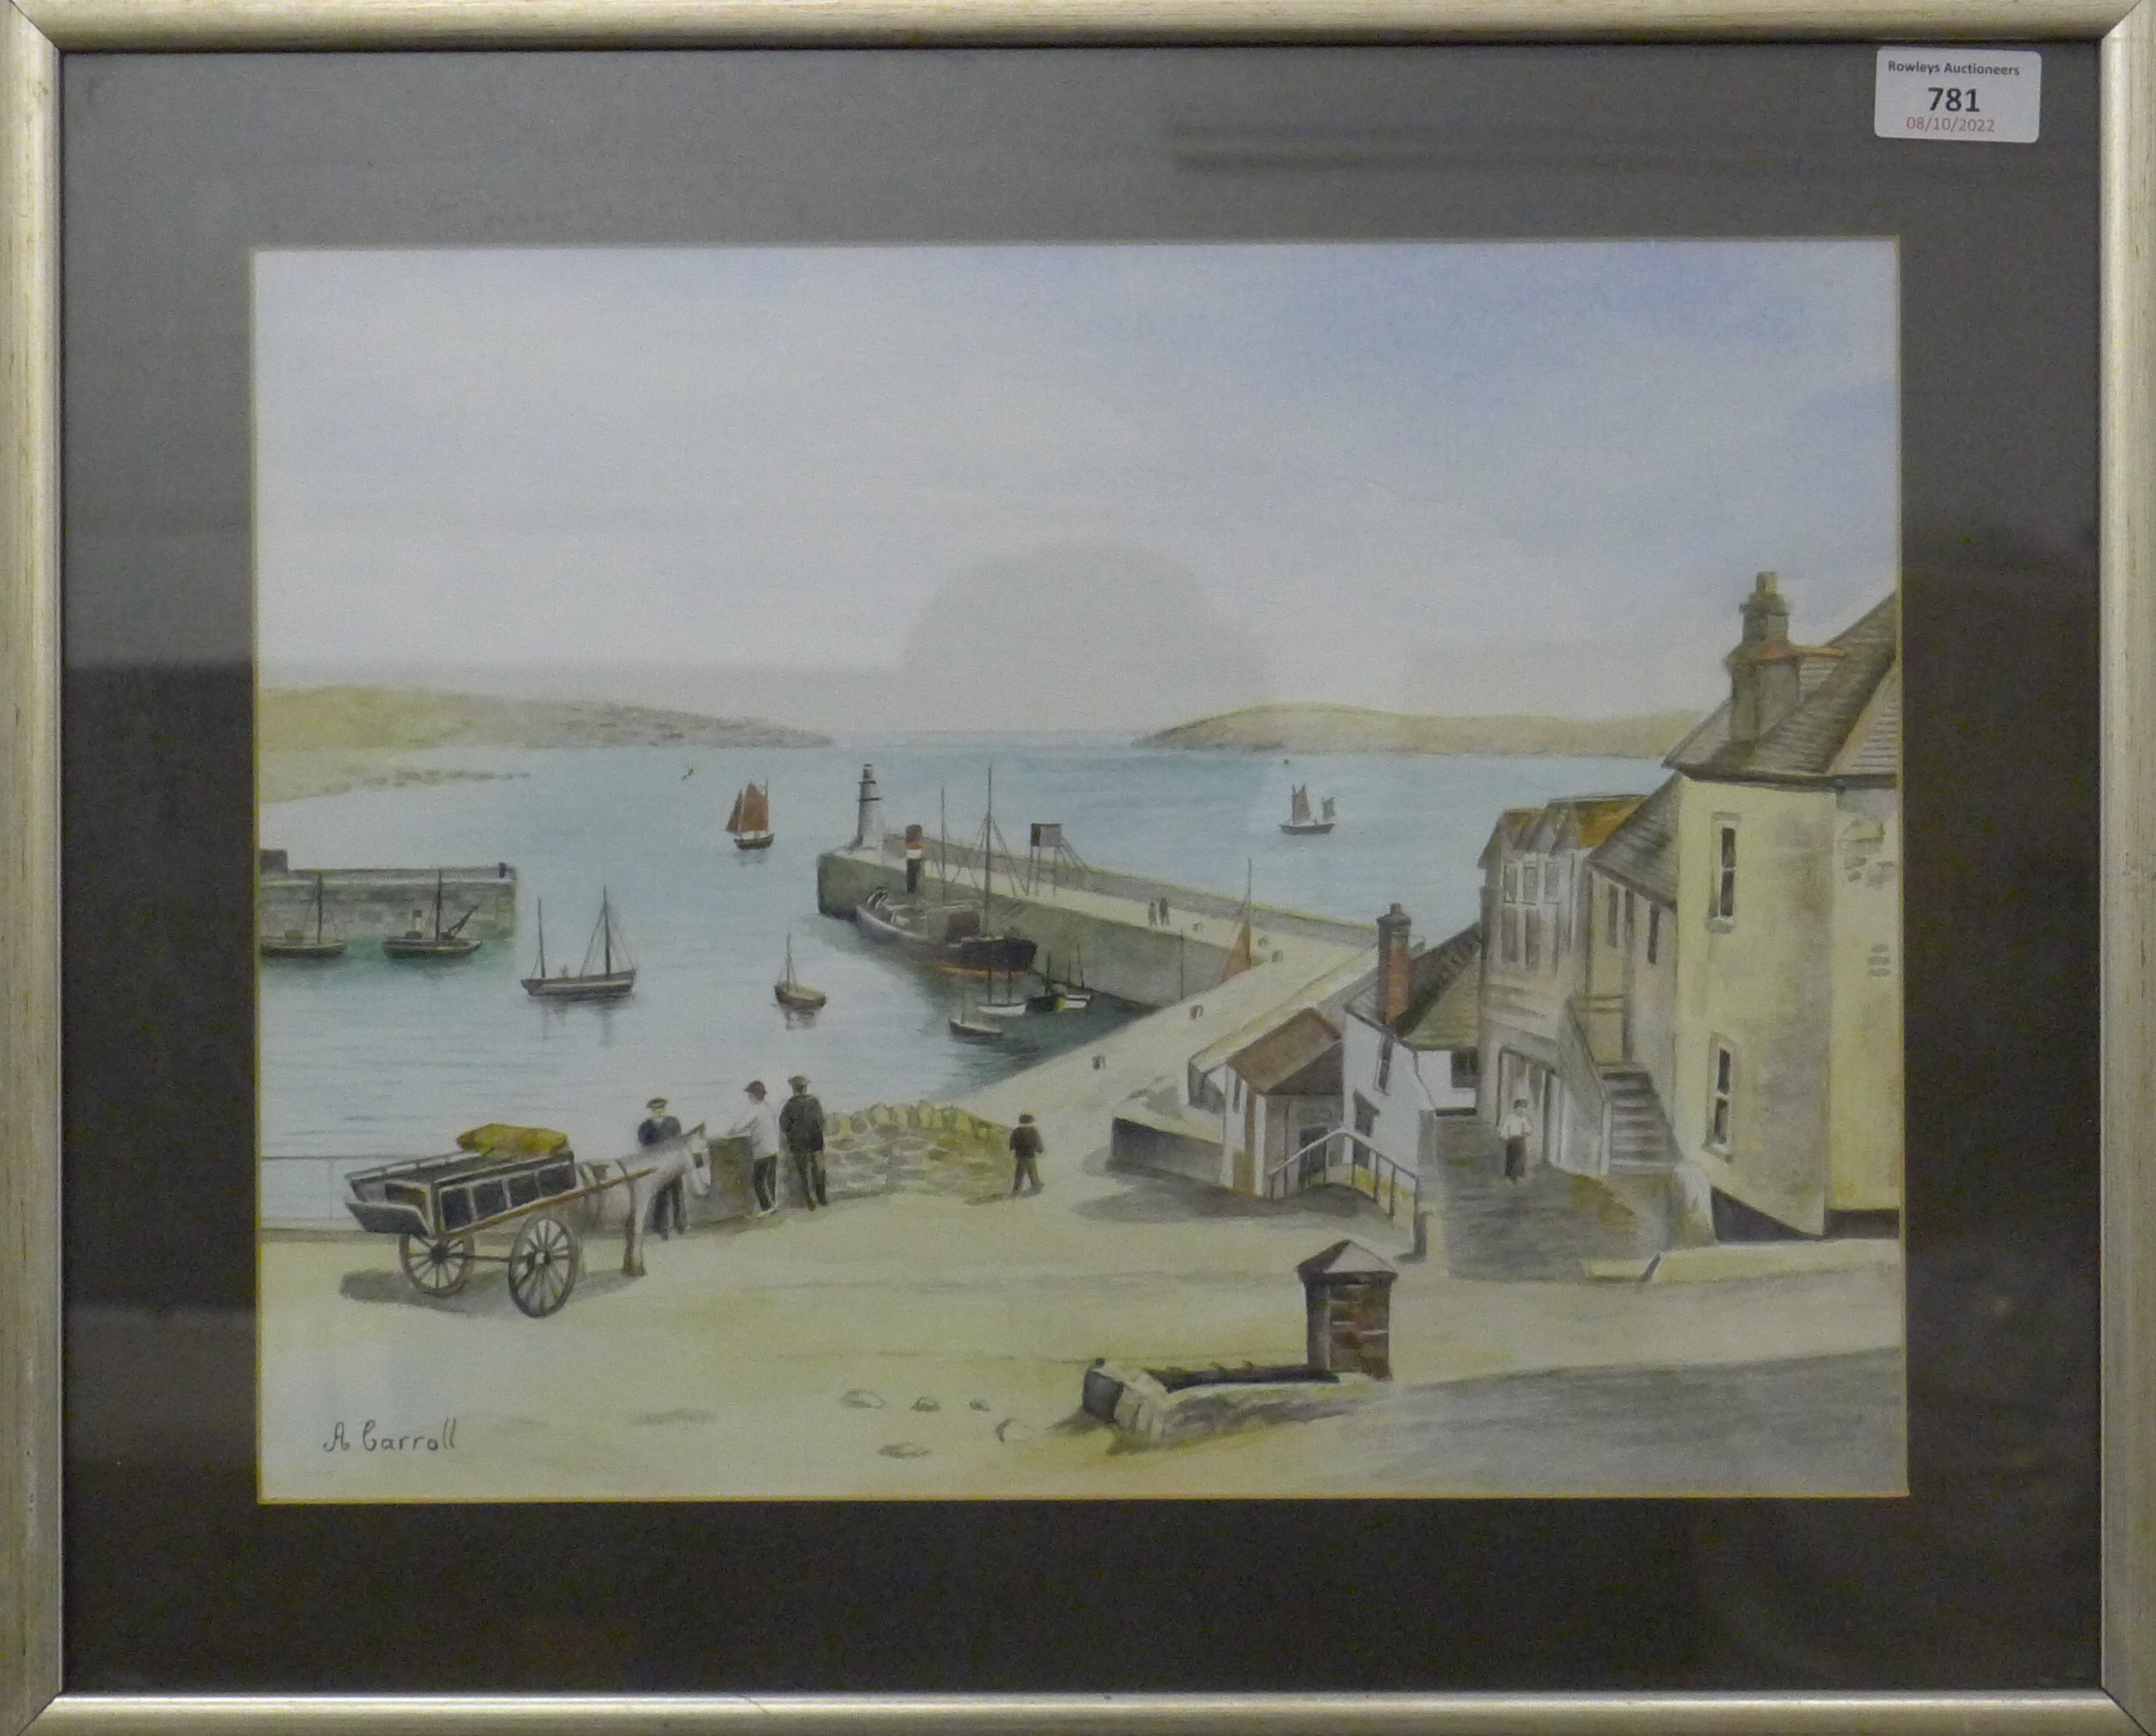 A CARROLL, Harbour Scene, watercolour, framed and glazed. 38 x 29 cm. - Image 2 of 3